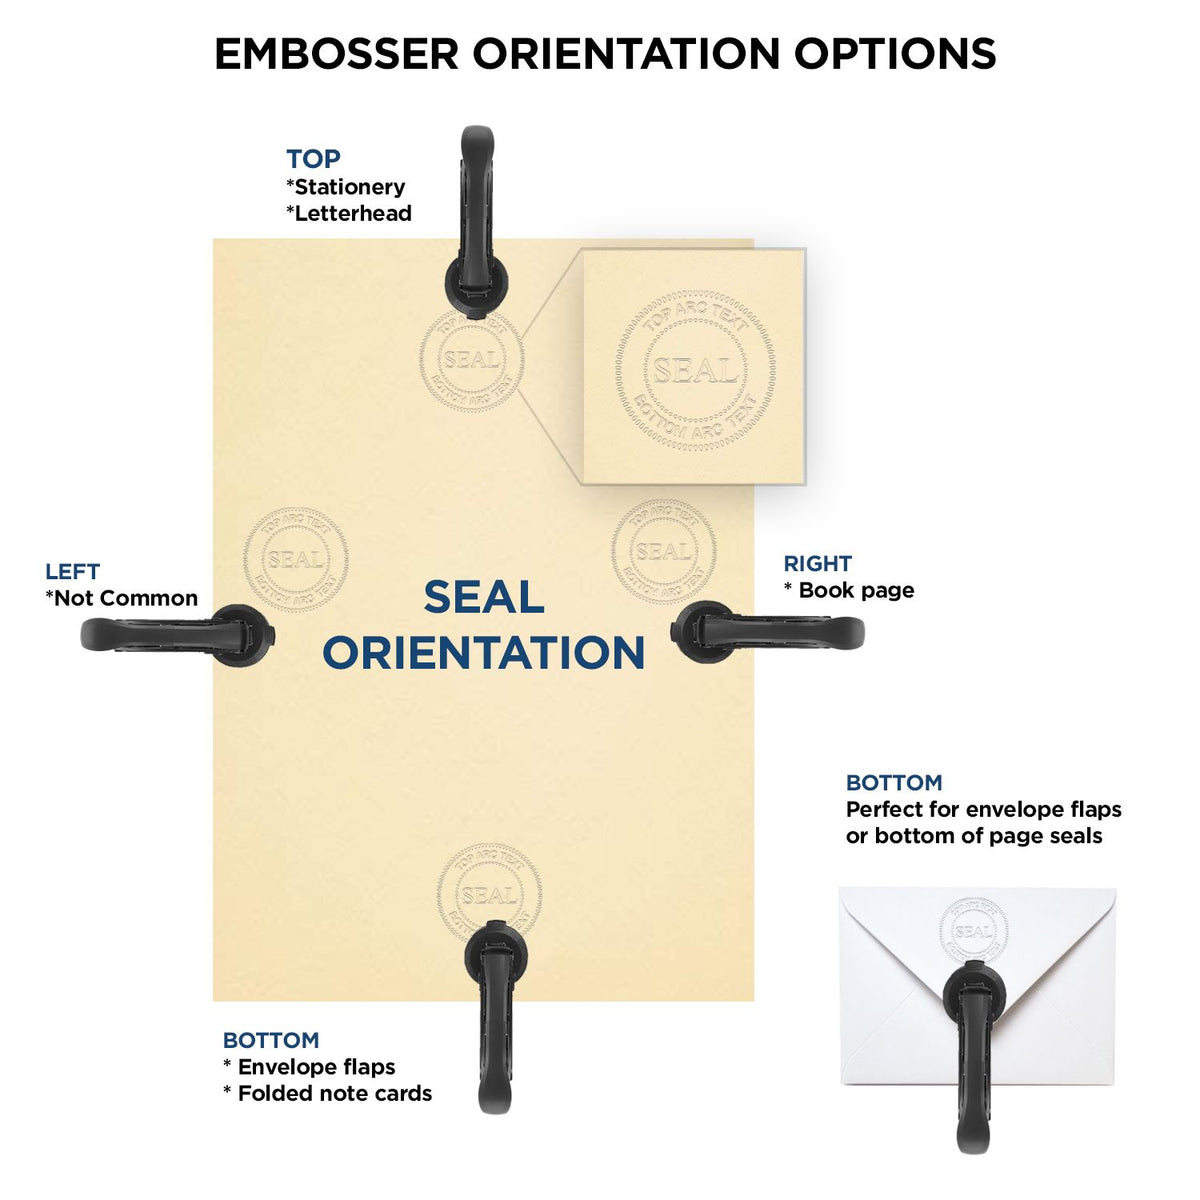 An infographic for the Soft Delaware Professional Engineer Seal showing embosser orientation, this is showing examples of a top, bottom, right and left insert.